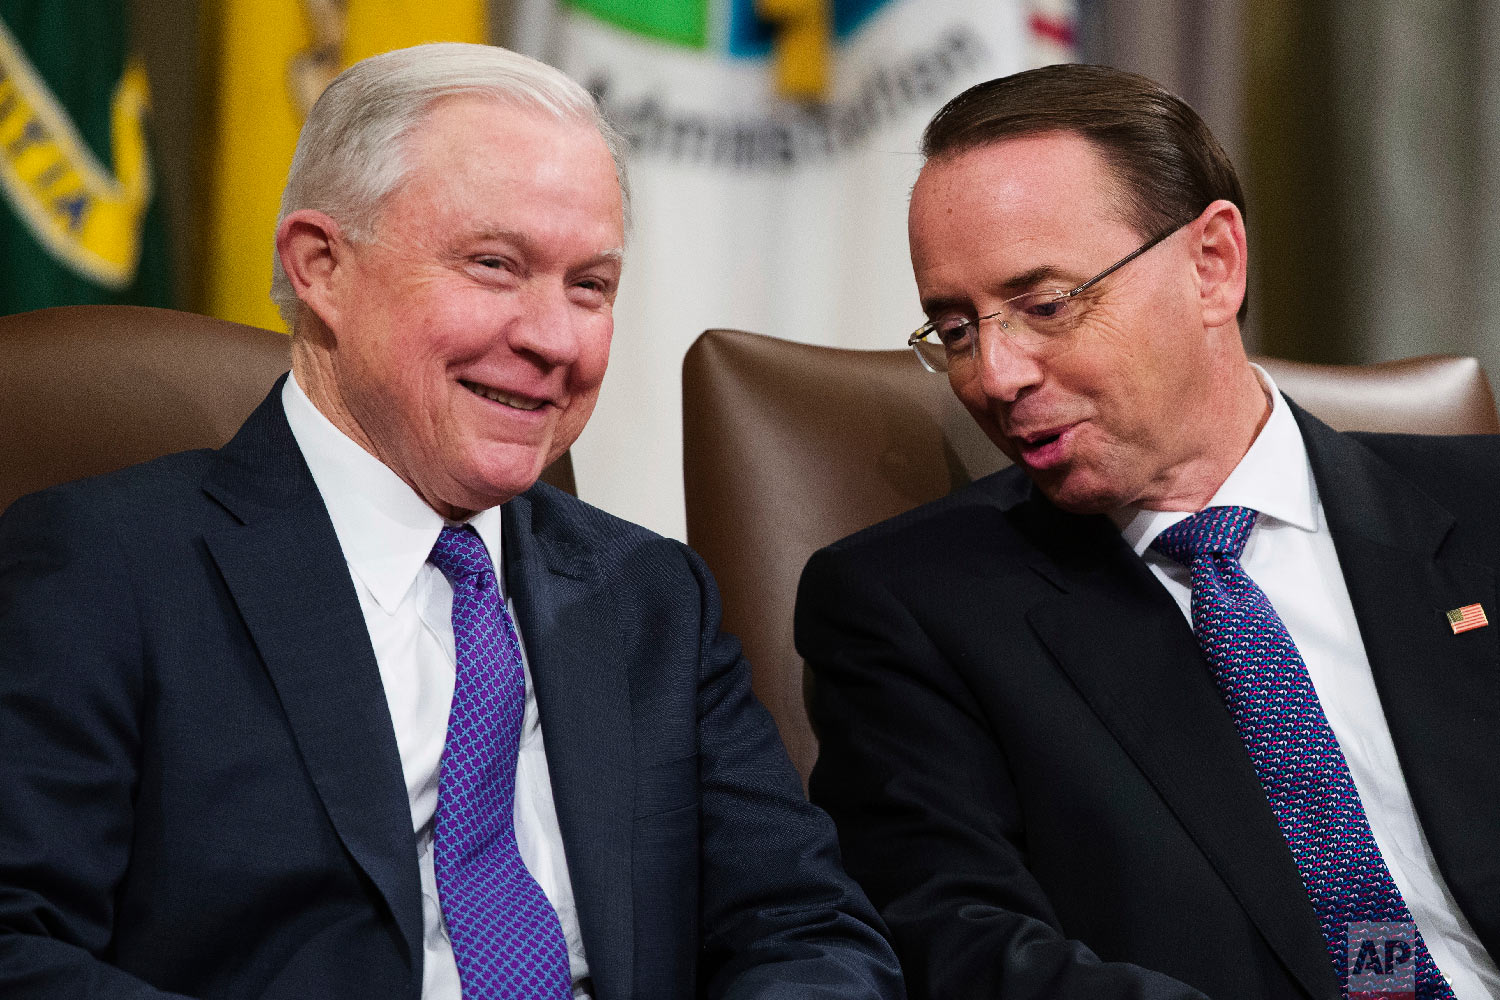  Attorney General Jeff Sessions, left, and Deputy Attorney General Rod Rosenstein, talk during an event to announce new strategic actions to combat the opioid crisis at the Department of Justice's National Opioid Summit in Washington on Oct. 25, 2018